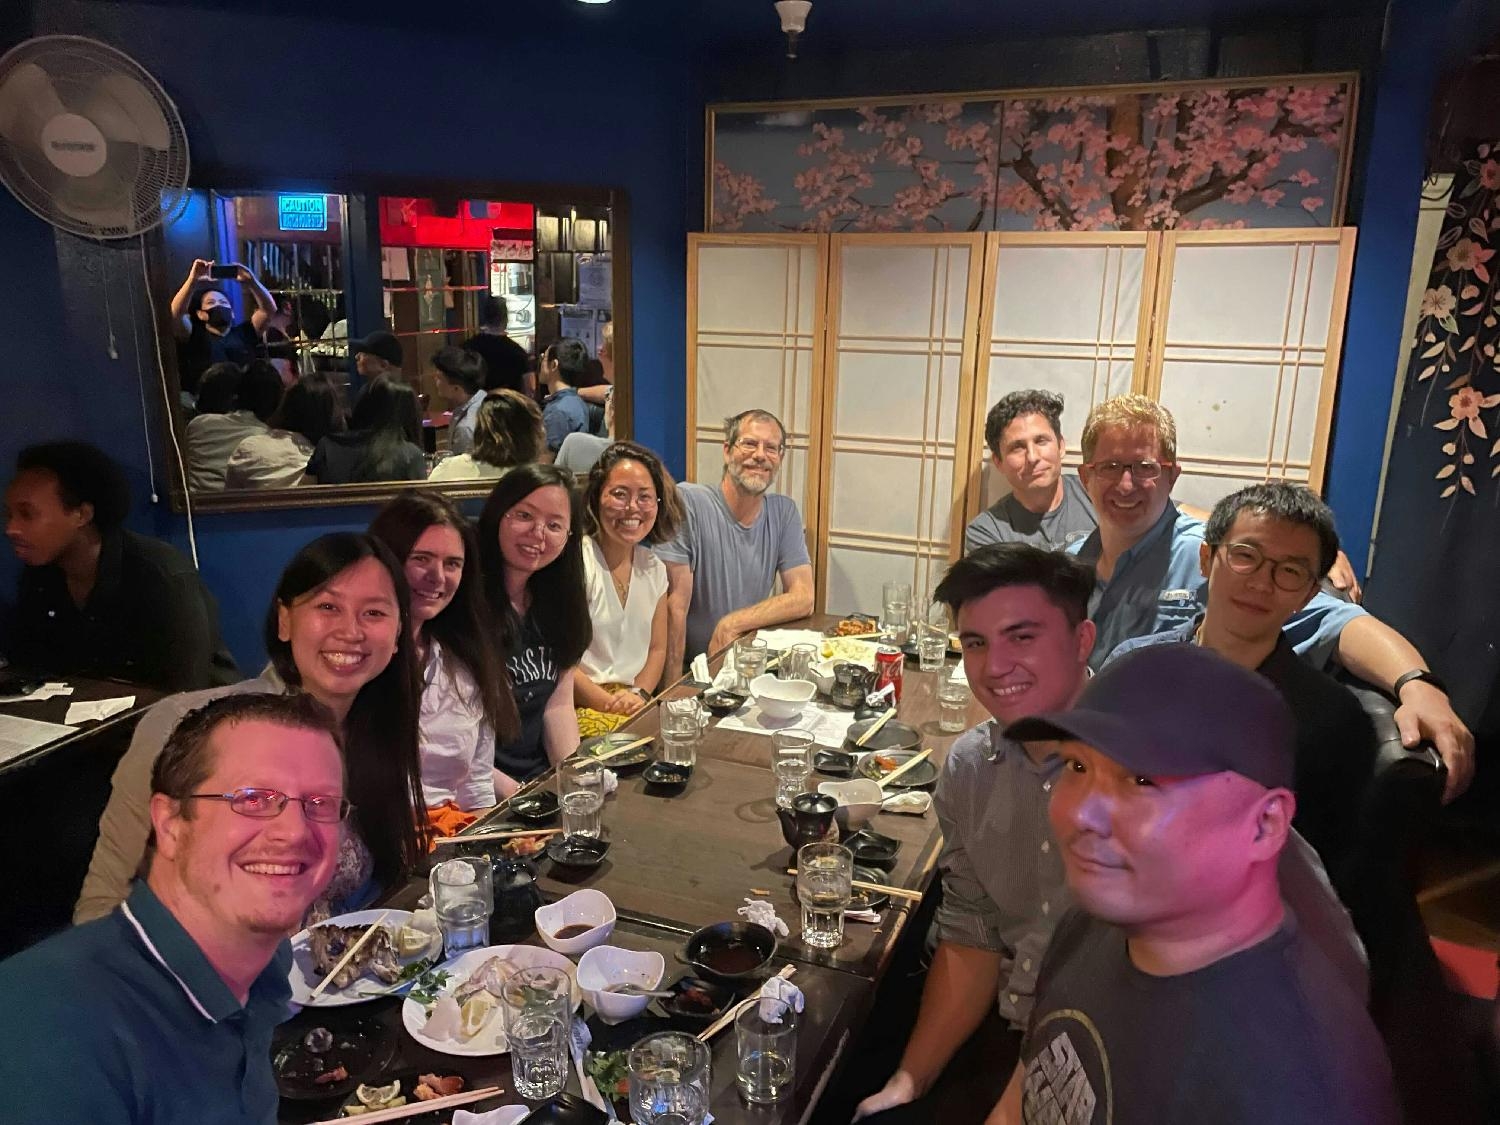 Recent team dinner in a COVID-safe environment, celebrating a coworkers birthday and our newest hire